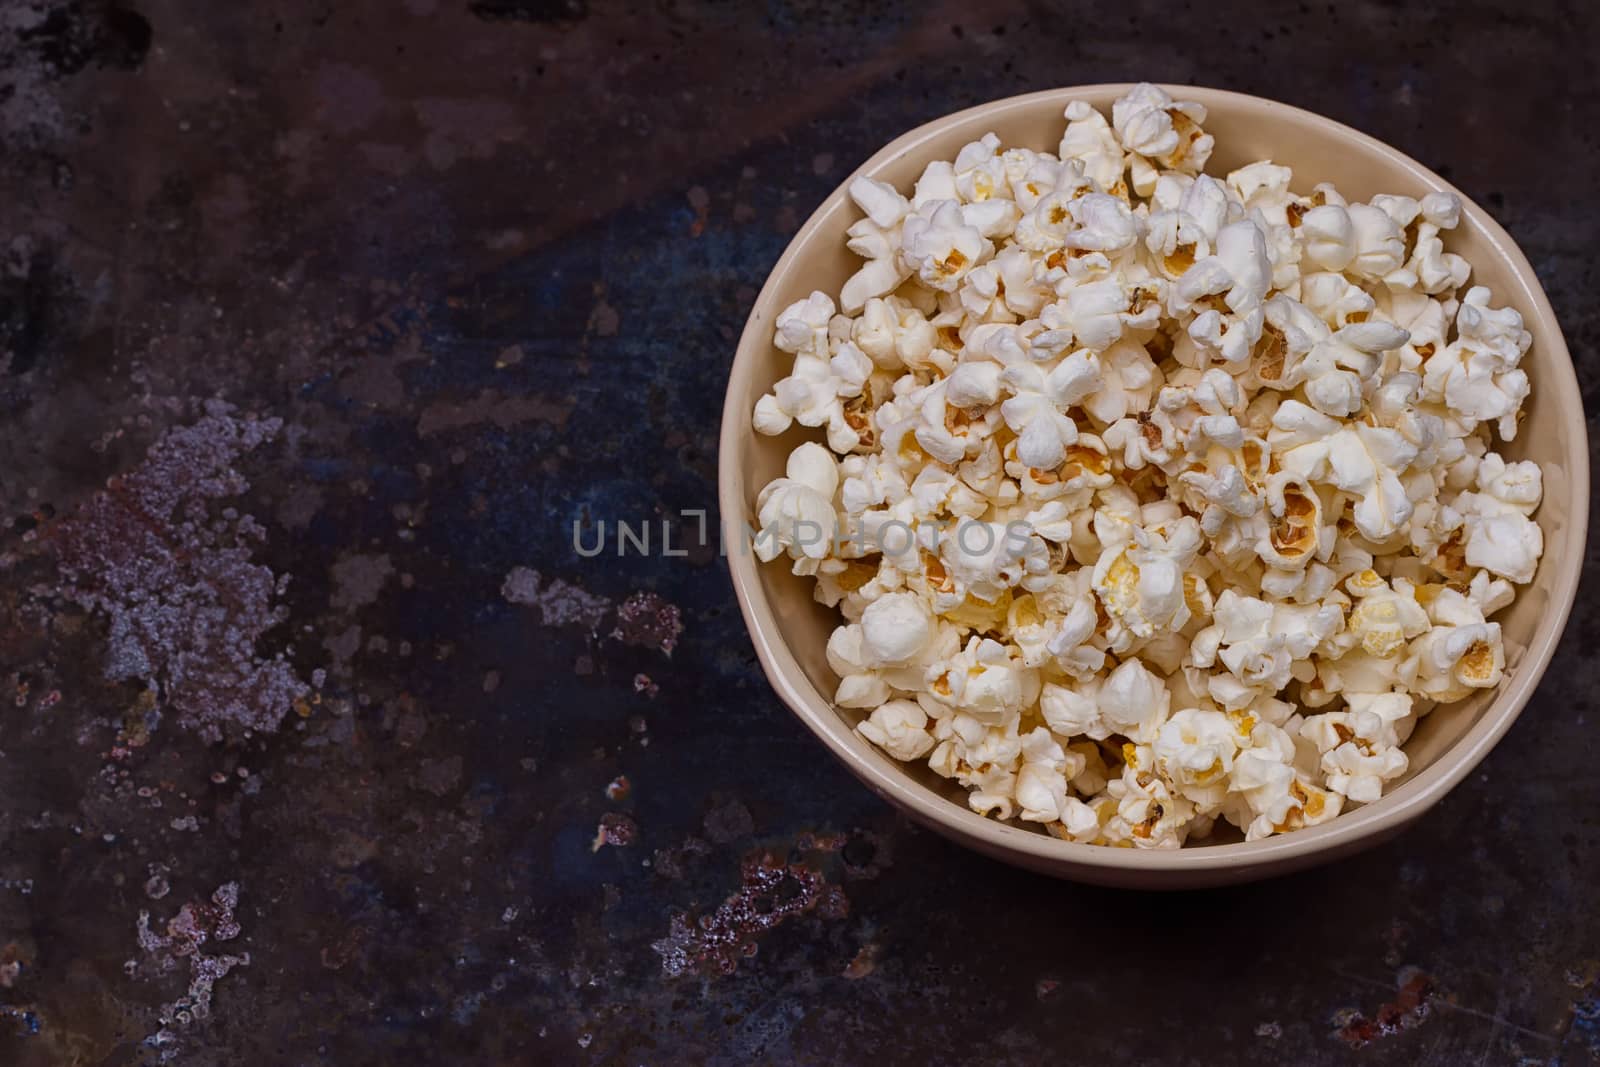 Popcorn in a bowl on a grunge background